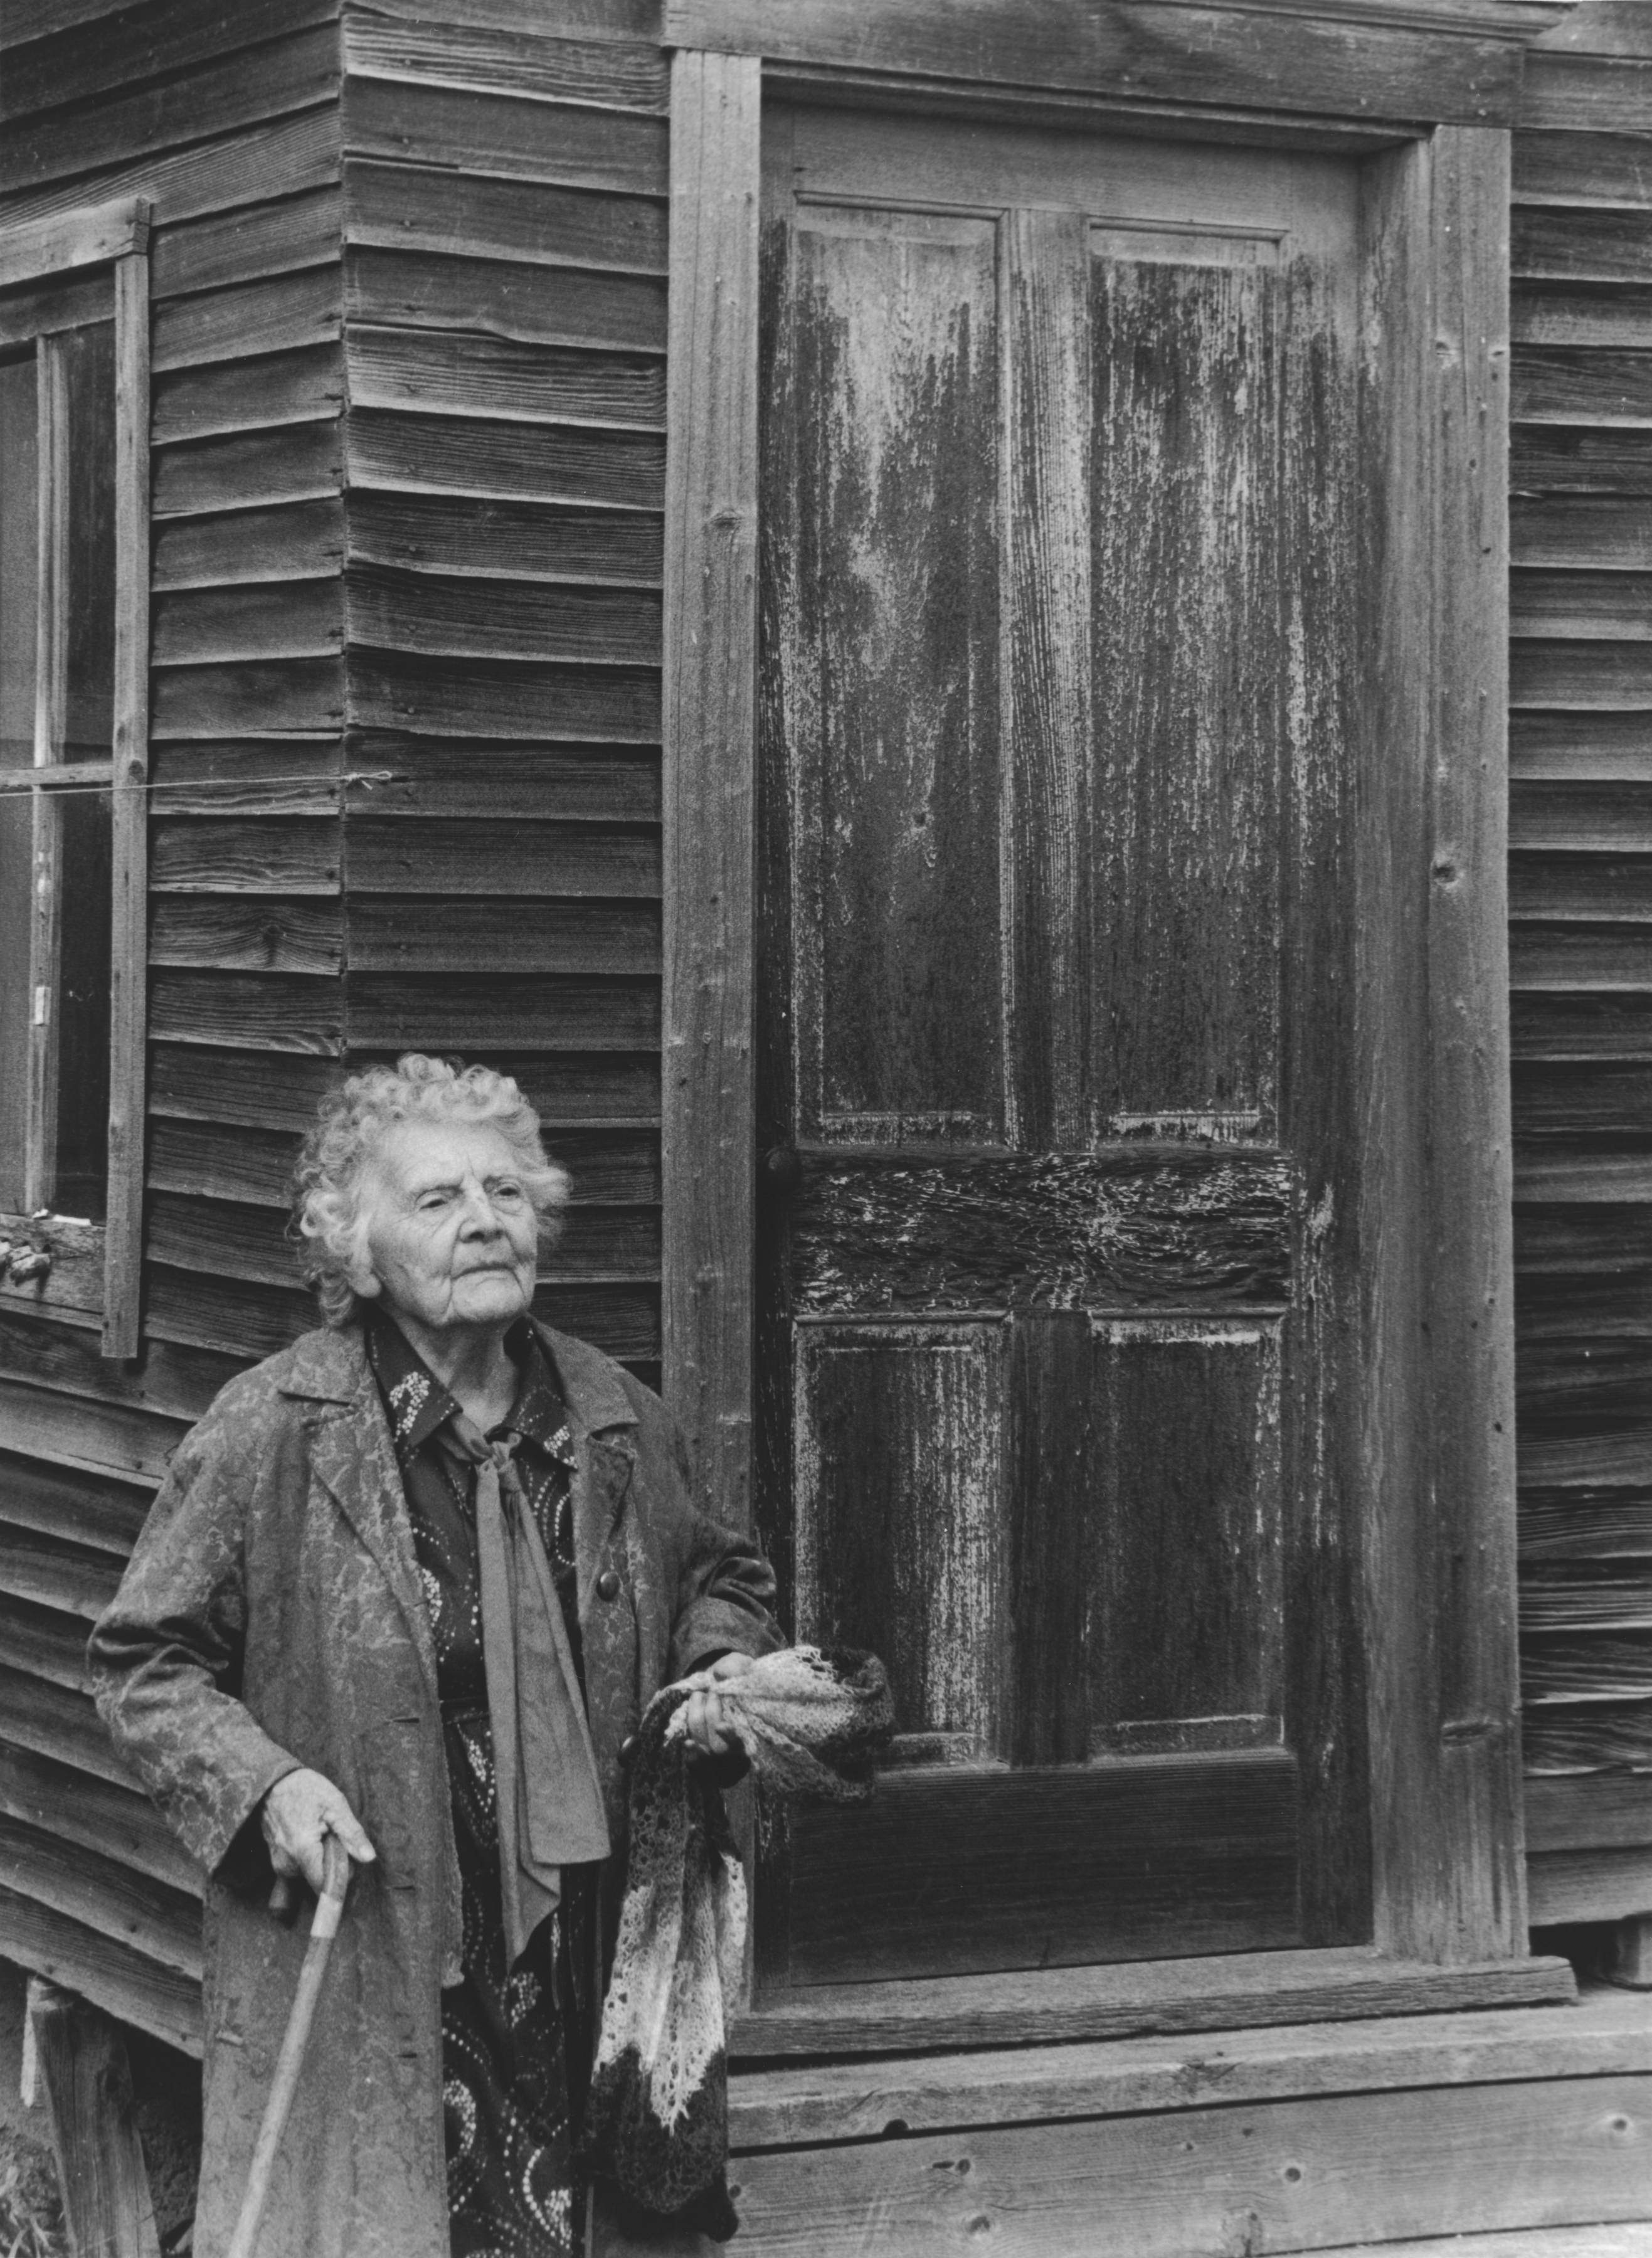 Black and white photo of elderly woman standing strong in front of small old wooden barn, holding scarf in one hand and cane in the other.